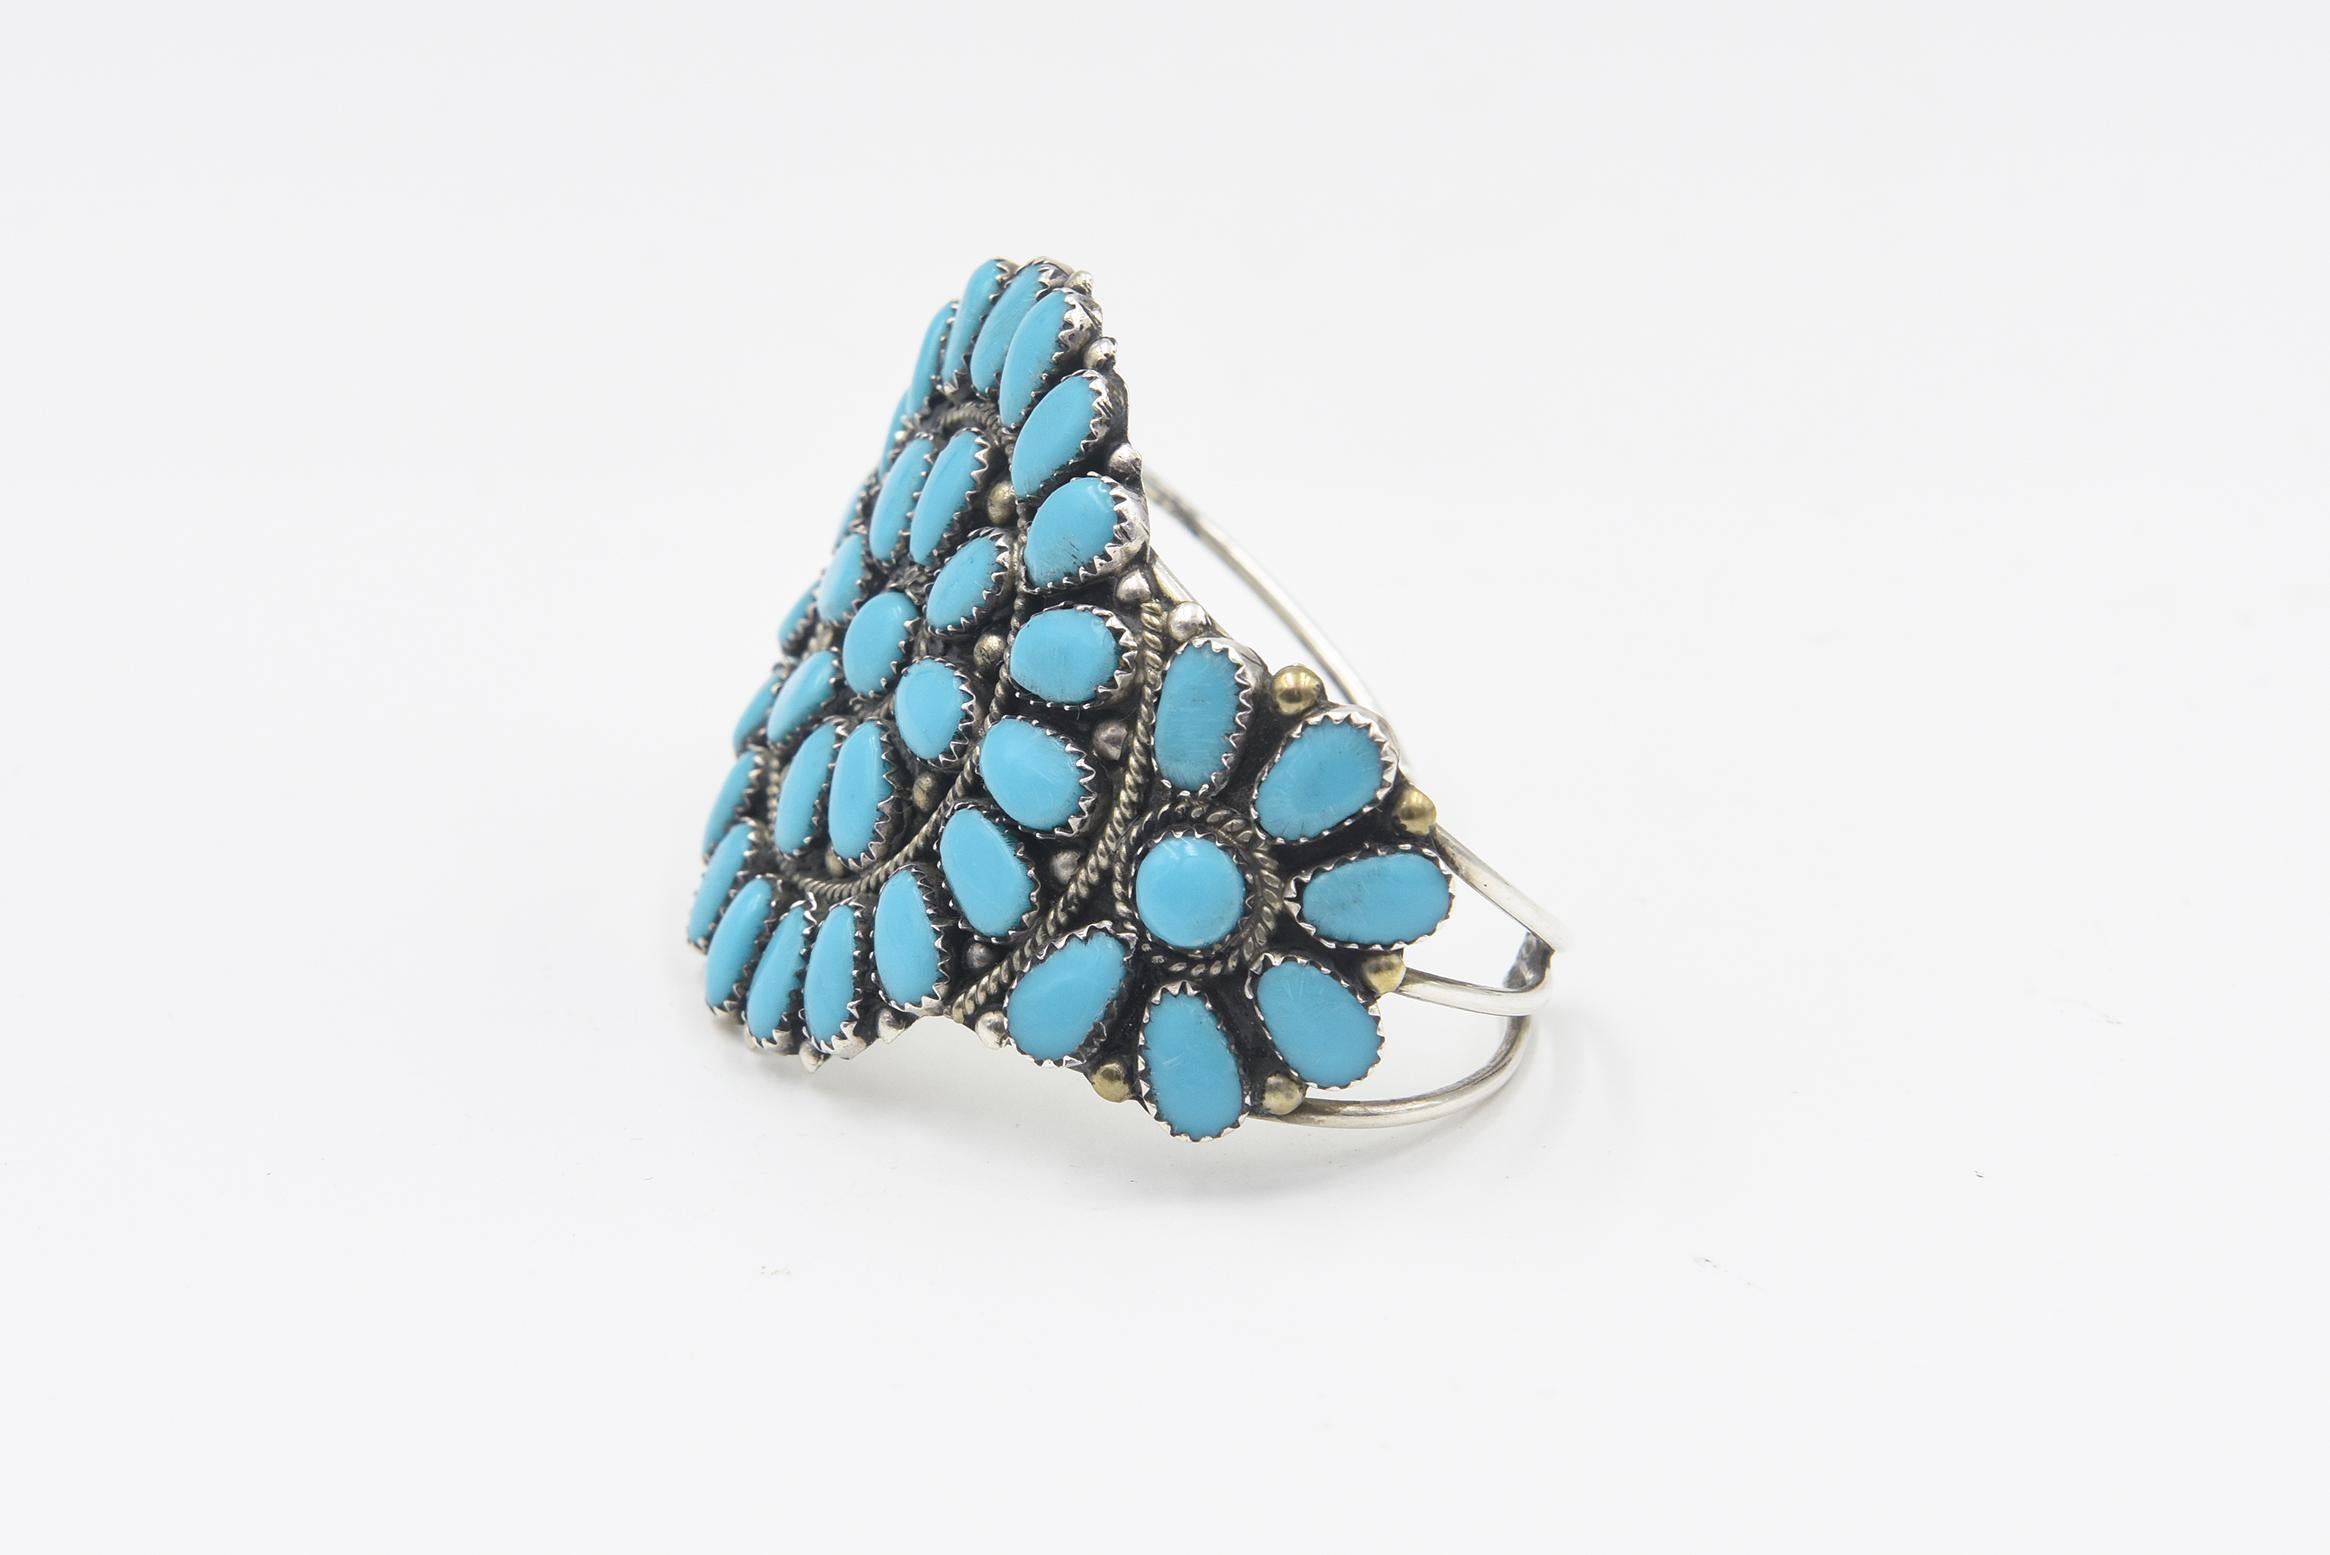 Beautiful vintage sun wheel cuff bracelet by Navajo Native American artist Juliana Williams made of sterling silver and turquoise.  The artist uses a clusters of turquoise pieces to create a sun in the center and a smaller suns on either side. 